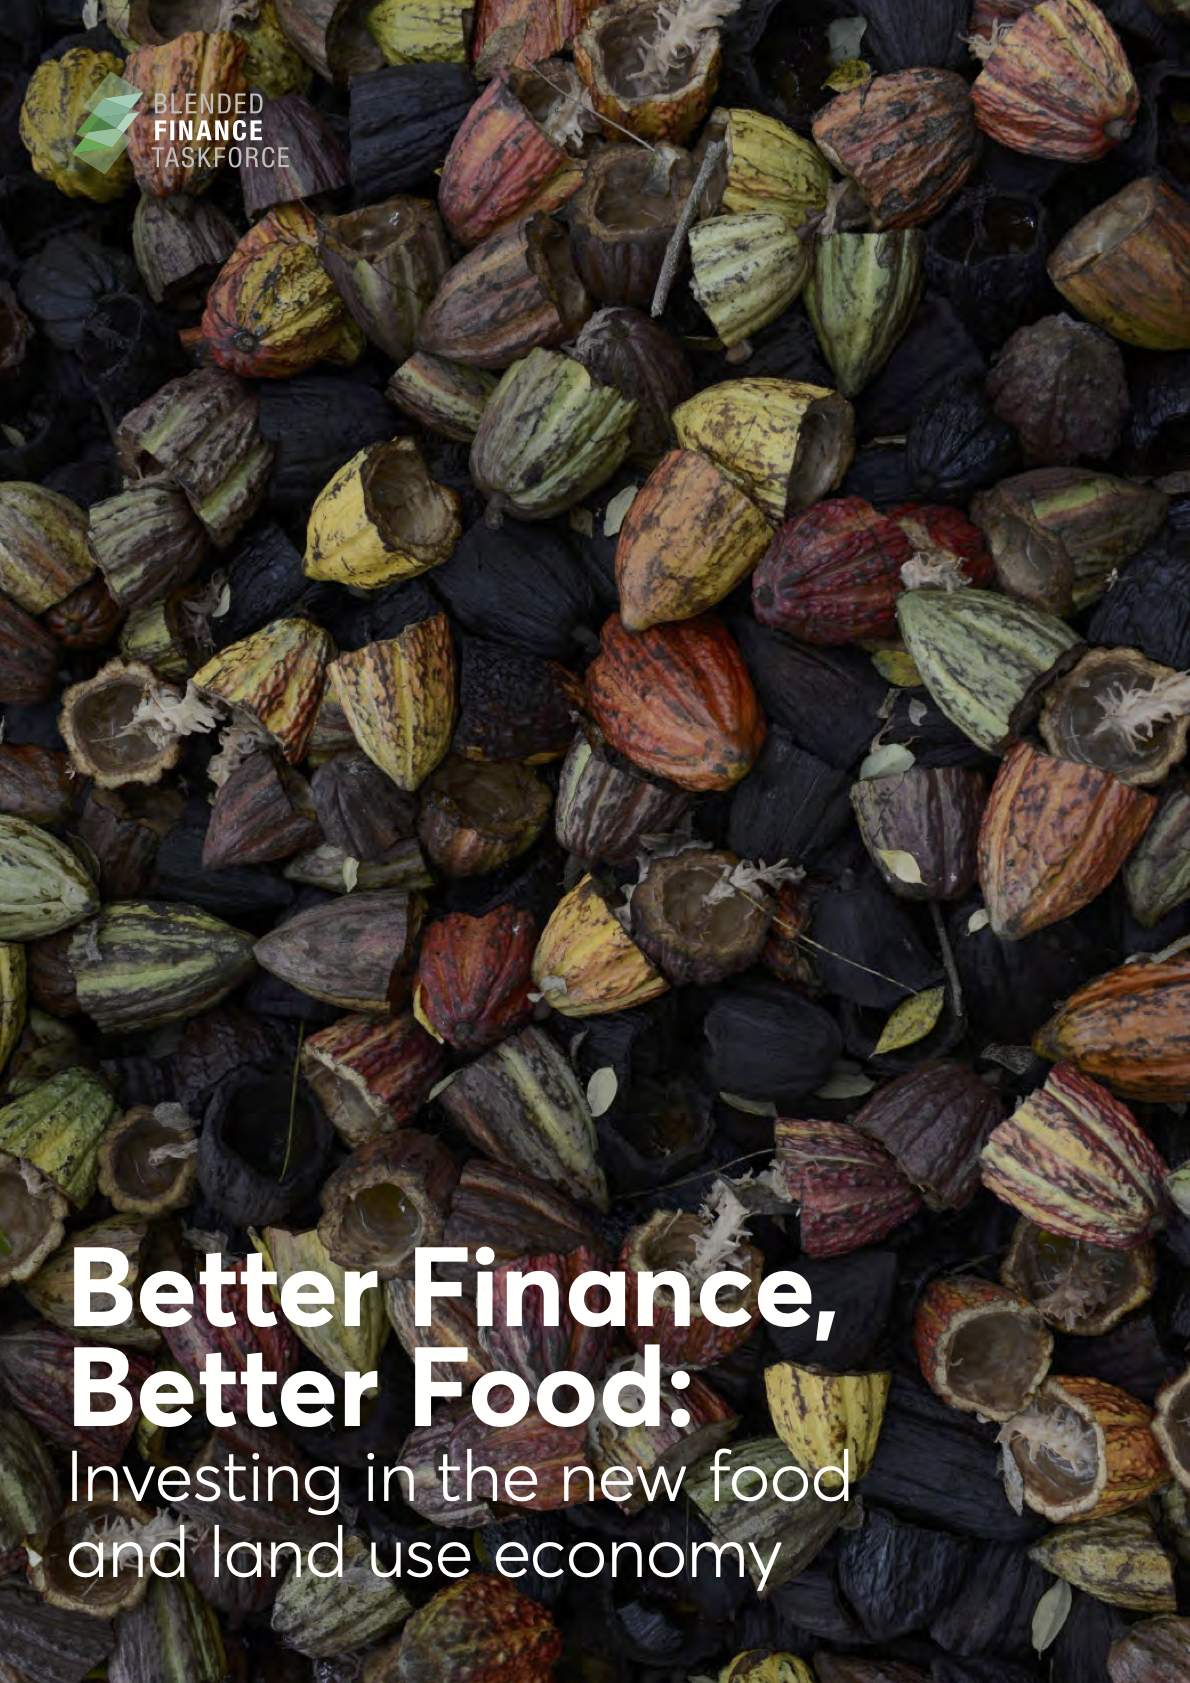 Better Finance, Better Food: Investing in the new food and land use economy